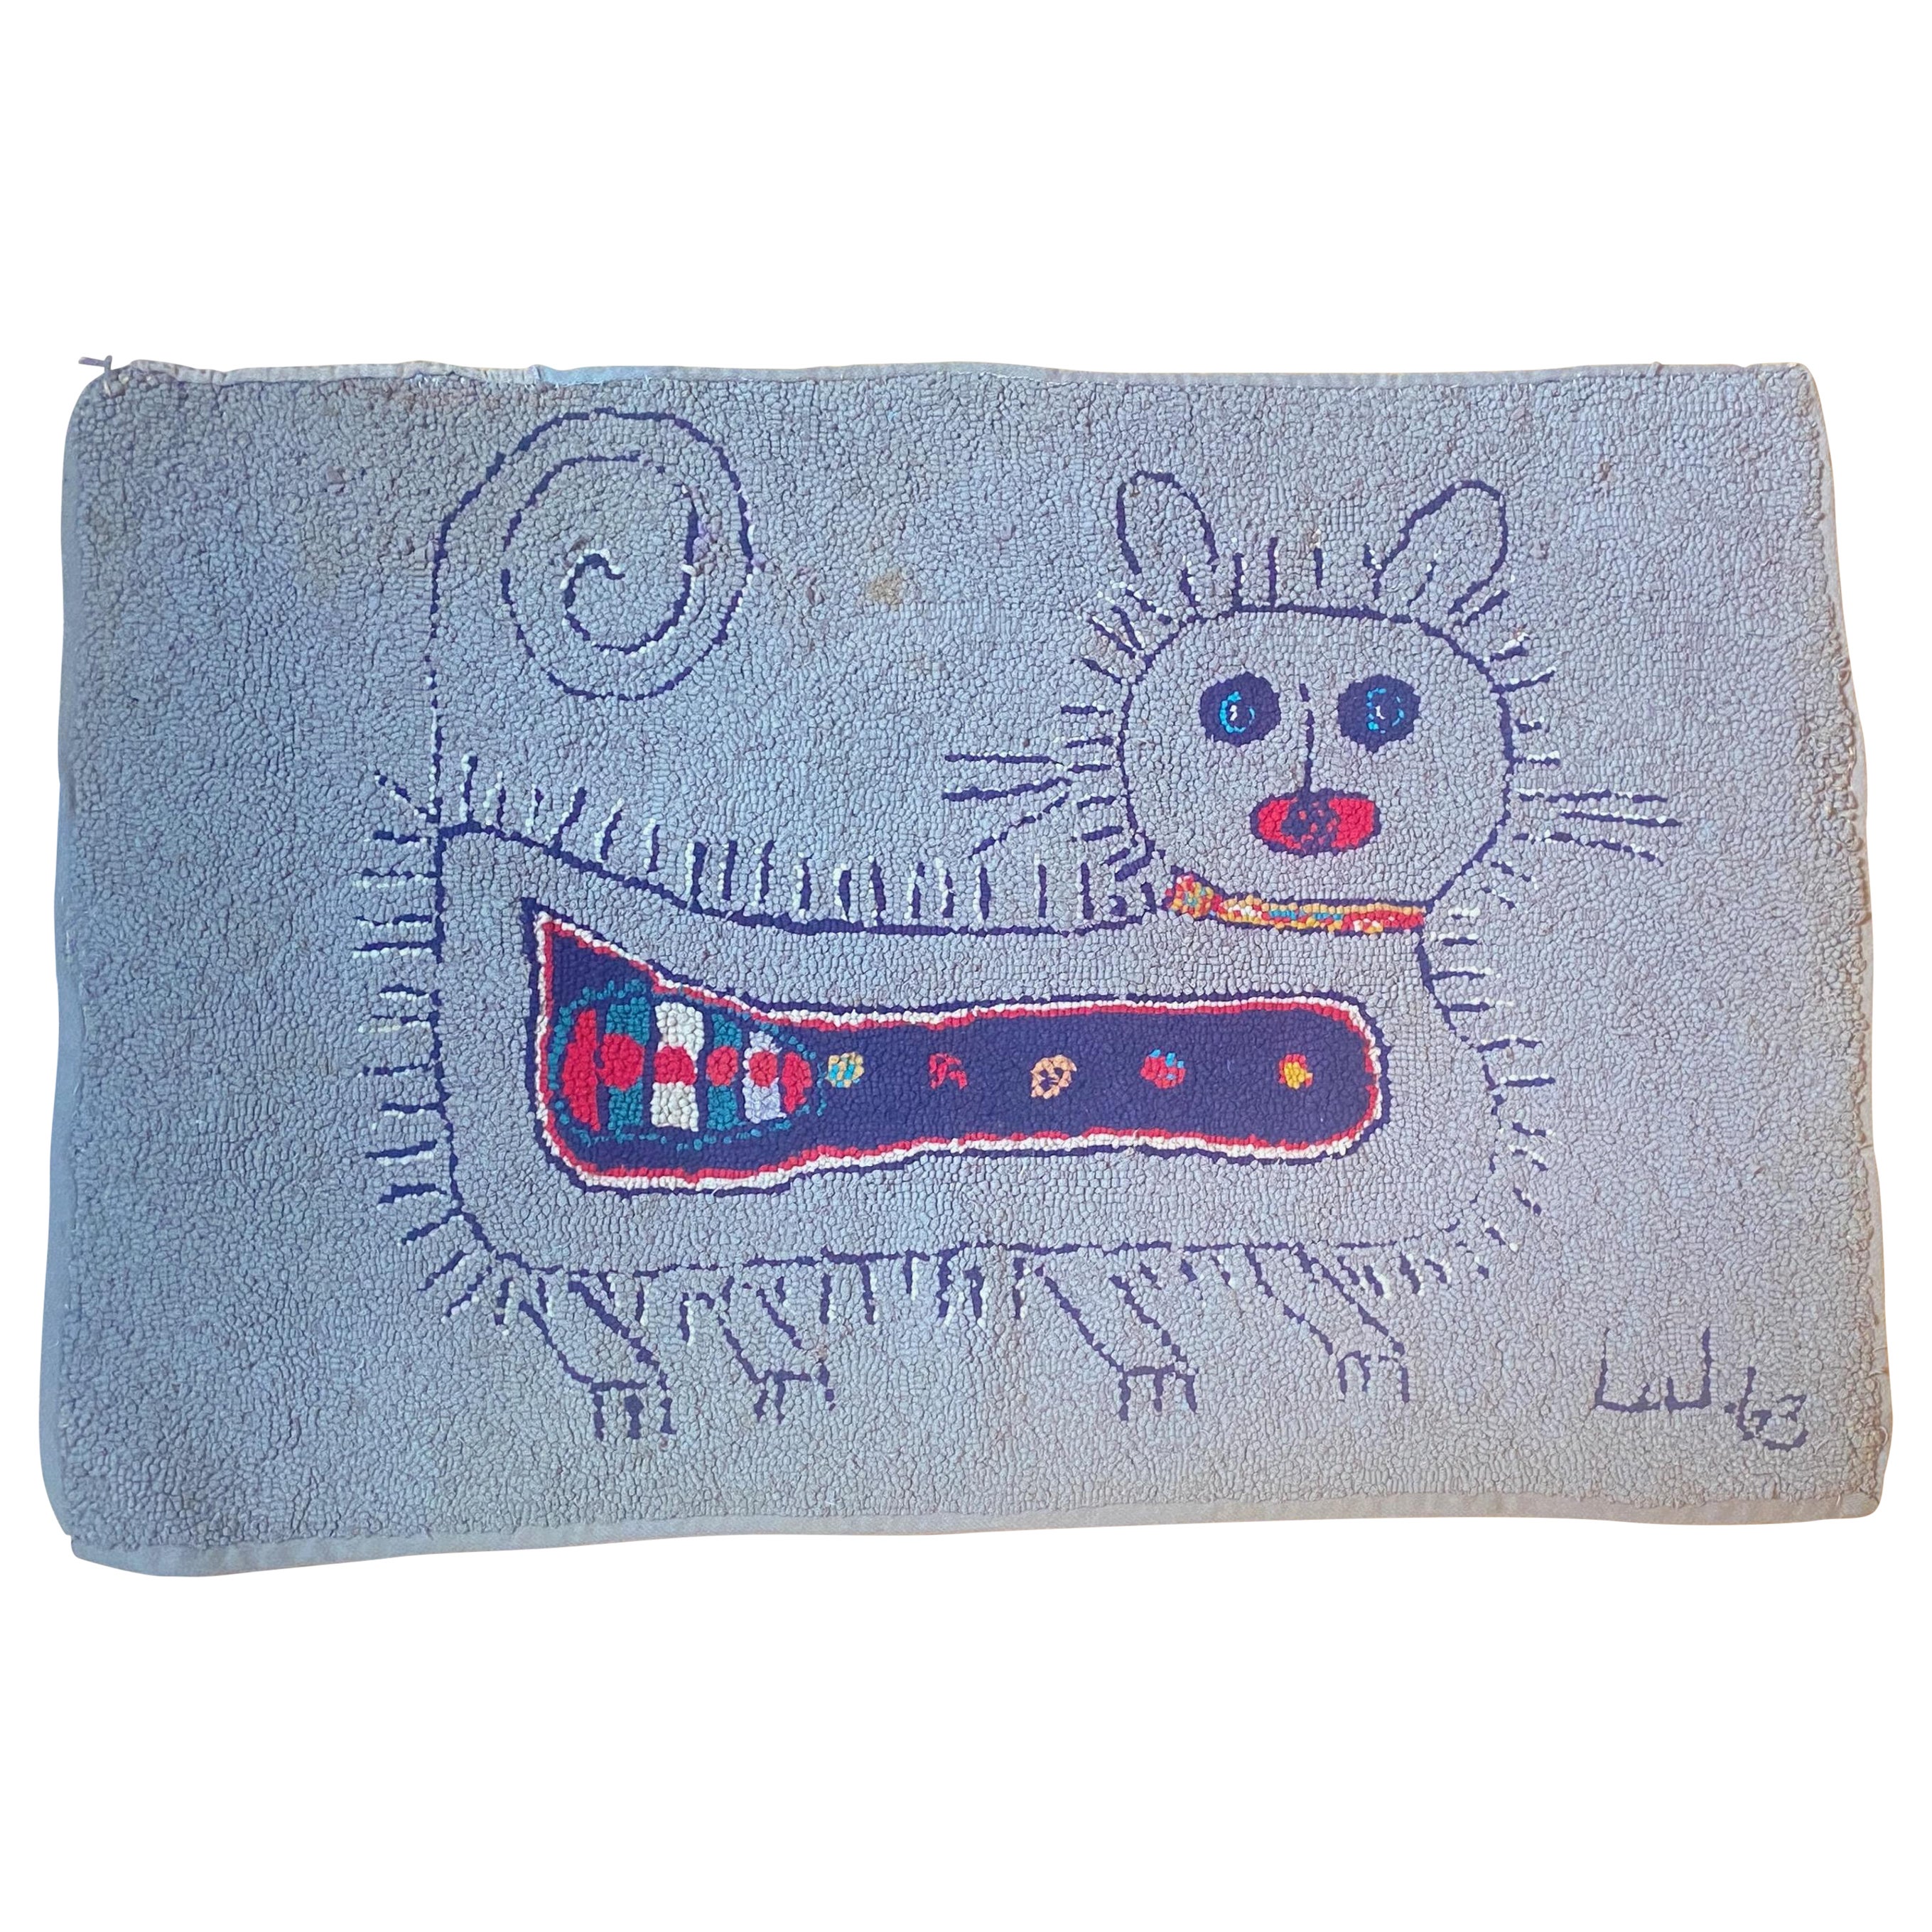 Modernist Mid Century American Folk Art Hooked Rug of a Cat dated 1963